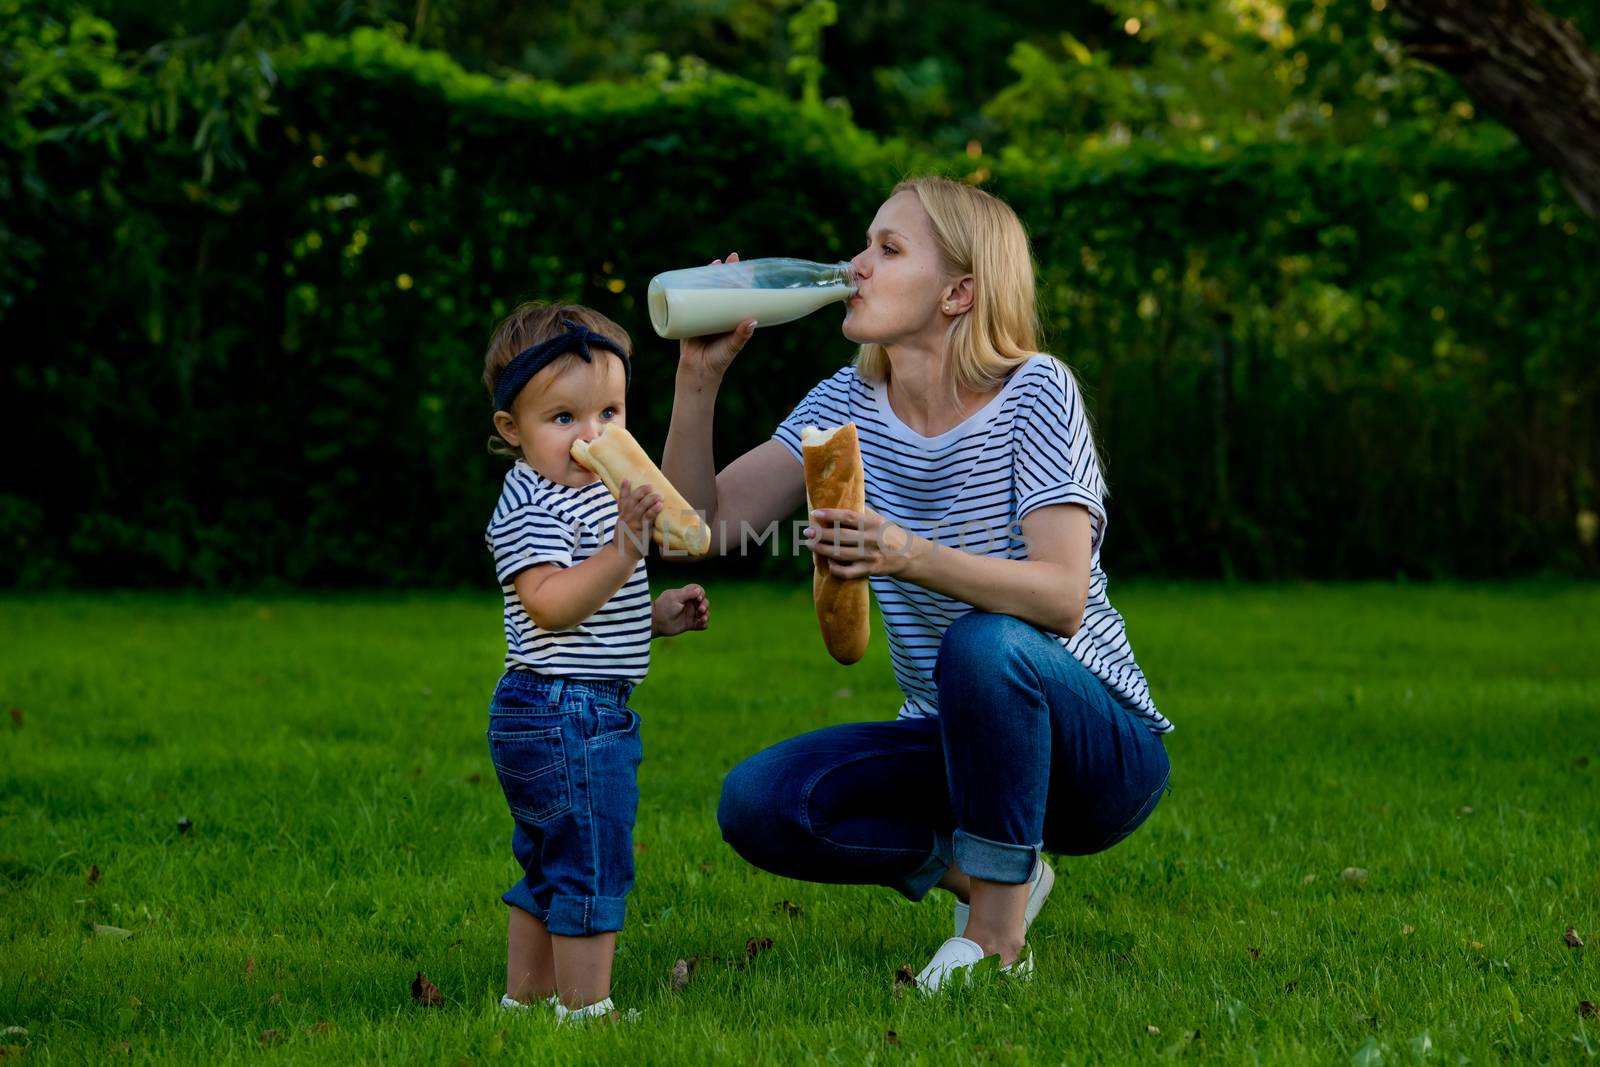 A young woman in jeans and a striped T-shirt drink milk from a glass bottle. Family picnic. by leonik